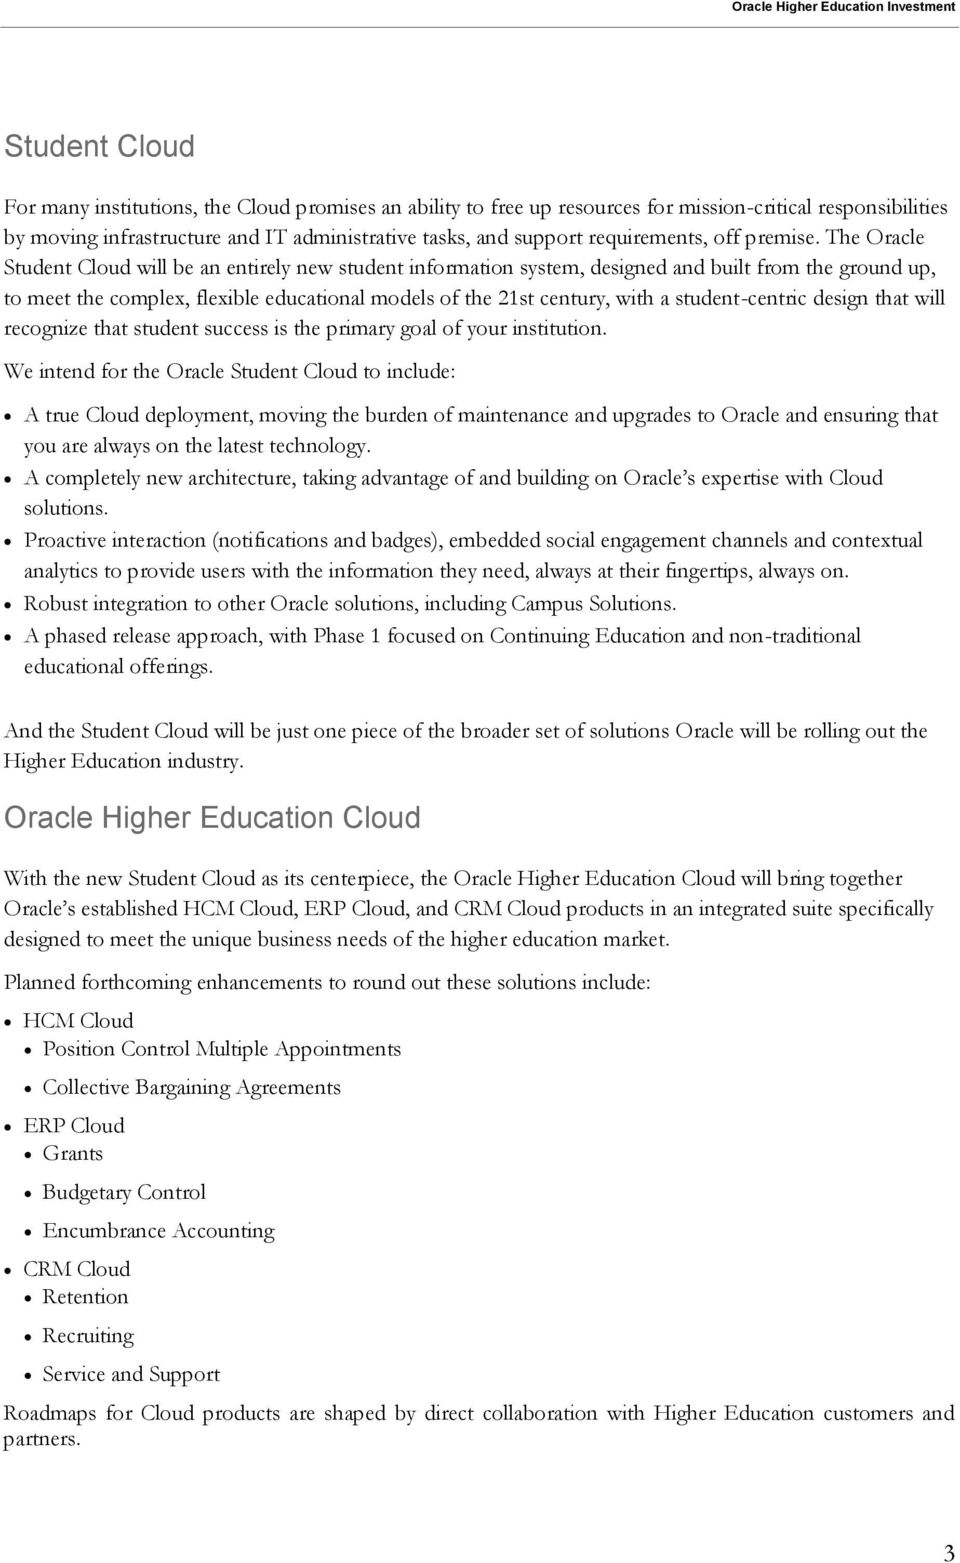 The Oracle Student Cloud will be an entirely new student information system, designed and built from the ground up, to meet the complex, flexible educational models of the 21st century, with a